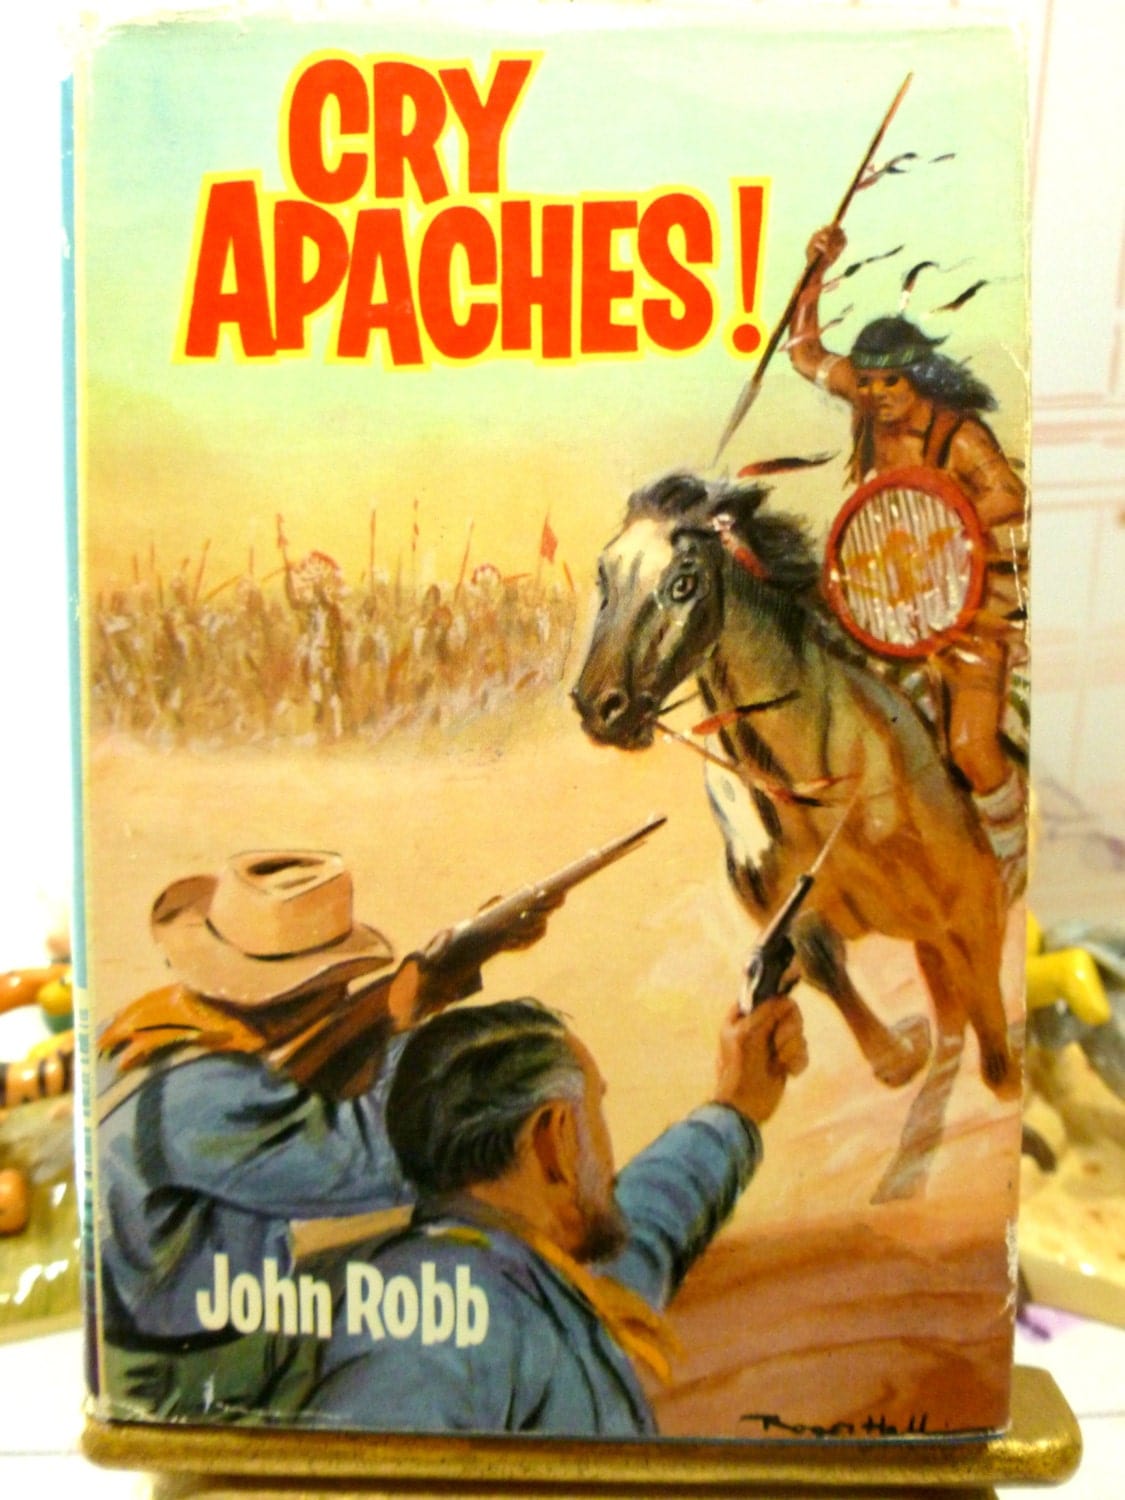 Cover of Cry Apache Catsfoot Cowboy Stories 1960s Vintage Hardback children's book showing cowboy fighting an Indian with guns. 